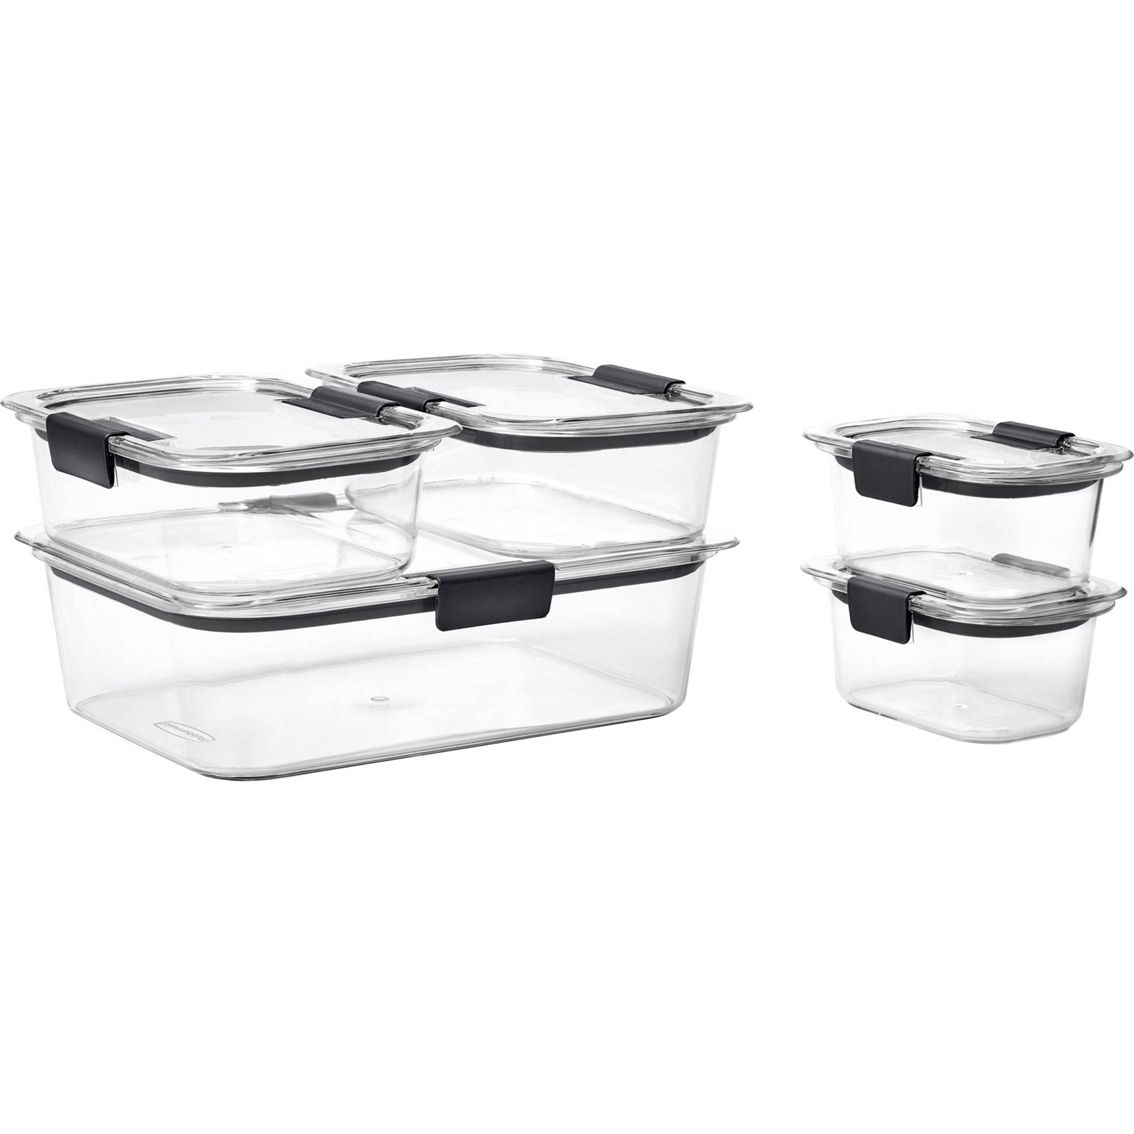  Rubbermaid 10-Cup Dry Food Container (Set of 3), Clear